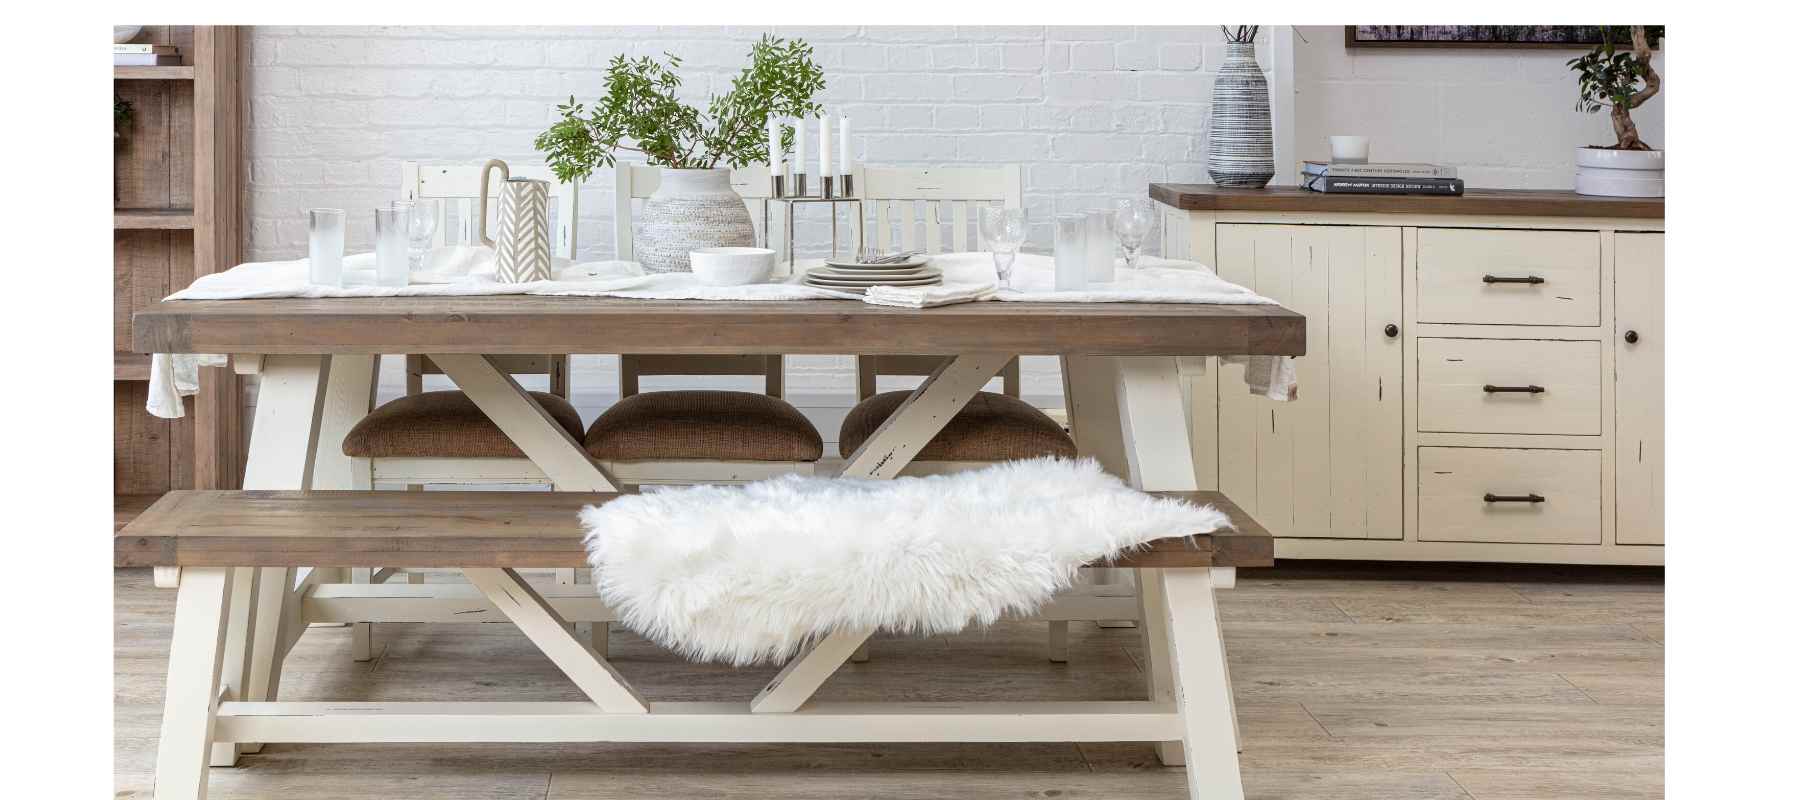 Farmhouse style wooden table with white legs and matching wooden dining bench